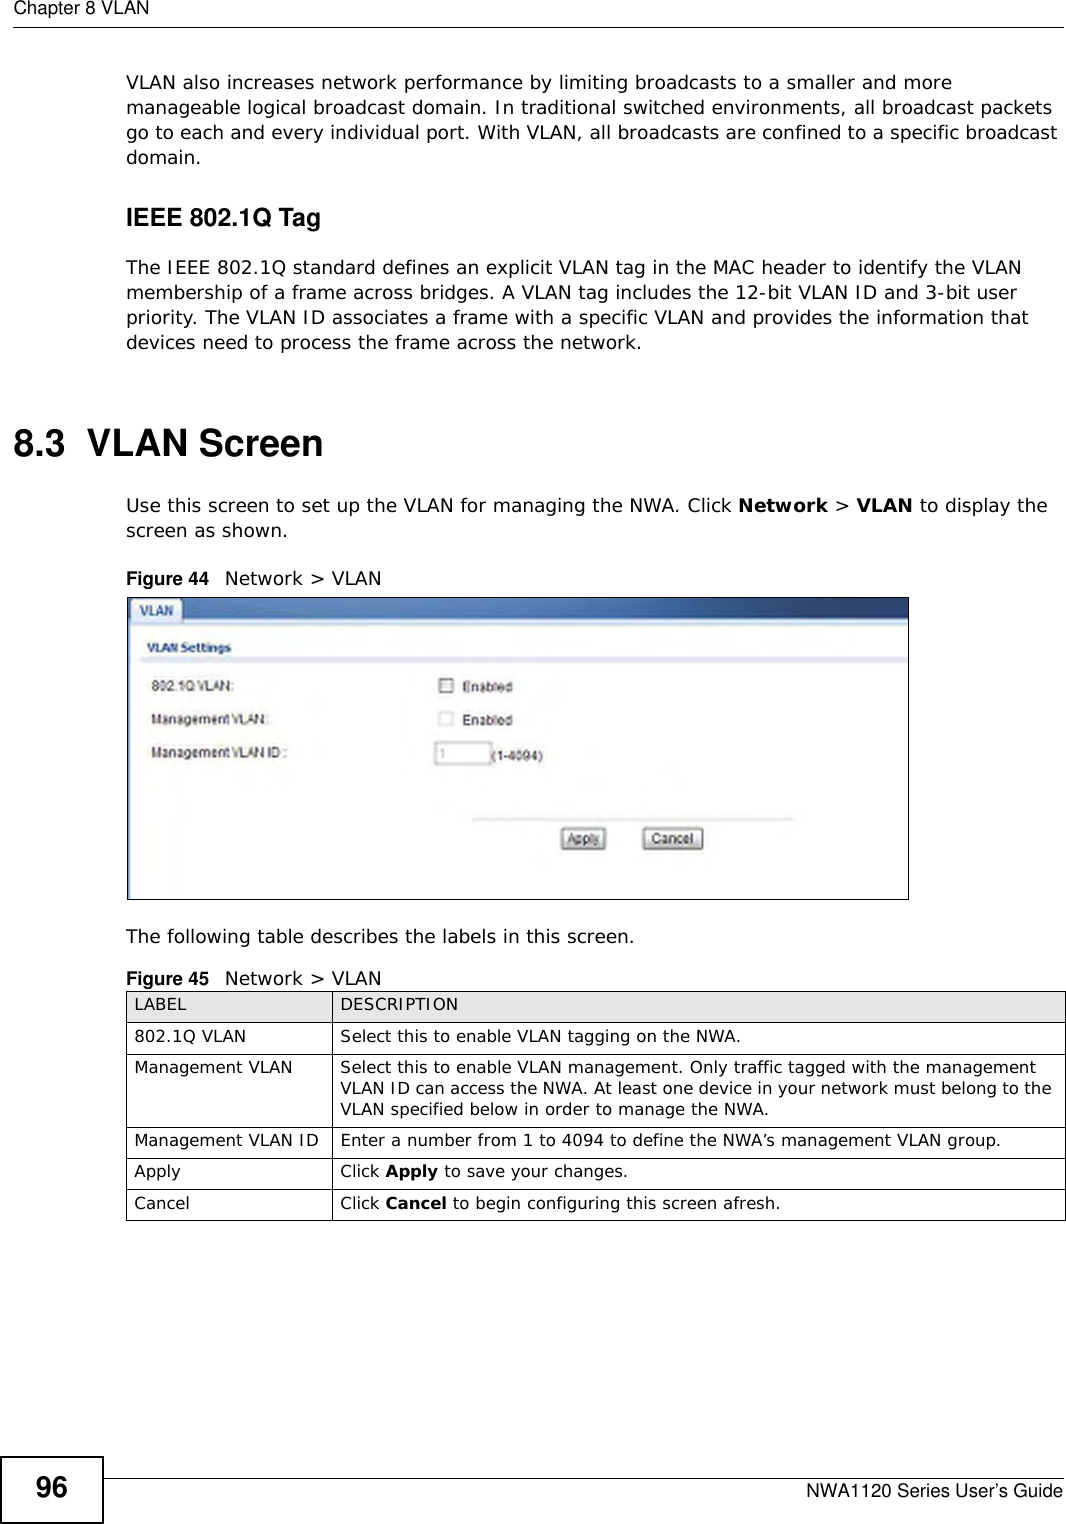 Chapter 8 VLANNWA1120 Series User’s Guide96VLAN also increases network performance by limiting broadcasts to a smaller and more manageable logical broadcast domain. In traditional switched environments, all broadcast packets go to each and every individual port. With VLAN, all broadcasts are confined to a specific broadcast domain. IEEE 802.1Q TagThe IEEE 802.1Q standard defines an explicit VLAN tag in the MAC header to identify the VLAN membership of a frame across bridges. A VLAN tag includes the 12-bit VLAN ID and 3-bit user priority. The VLAN ID associates a frame with a specific VLAN and provides the information that devices need to process the frame across the network. 8.3  VLAN ScreenUse this screen to set up the VLAN for managing the NWA. Click Network &gt; VLAN to display the screen as shown.Figure 44   Network &gt; VLANThe following table describes the labels in this screen.Figure 45   Network &gt; VLANLABEL DESCRIPTION802.1Q VLAN  Select this to enable VLAN tagging on the NWA.Management VLAN Select this to enable VLAN management. Only traffic tagged with the management VLAN ID can access the NWA. At least one device in your network must belong to the VLAN specified below in order to manage the NWA.Management VLAN ID Enter a number from 1 to 4094 to define the NWA’s management VLAN group. Apply Click Apply to save your changes.Cancel Click Cancel to begin configuring this screen afresh.